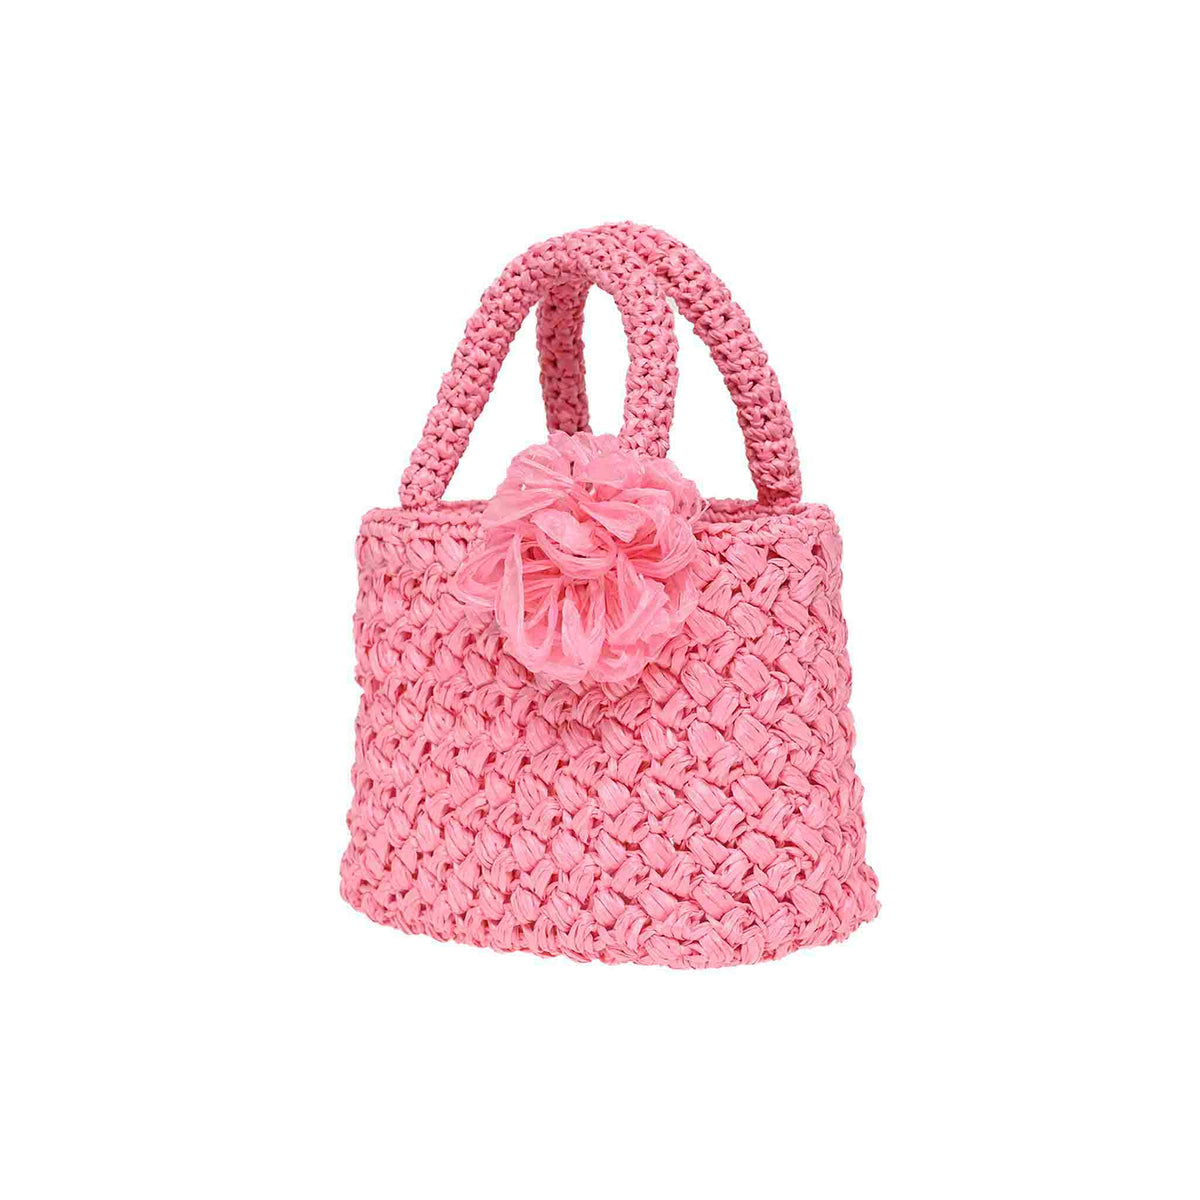 Trendy Baby Pink raffia tote bag from Carmen Sol, crafted for those who love both fashion and the beach